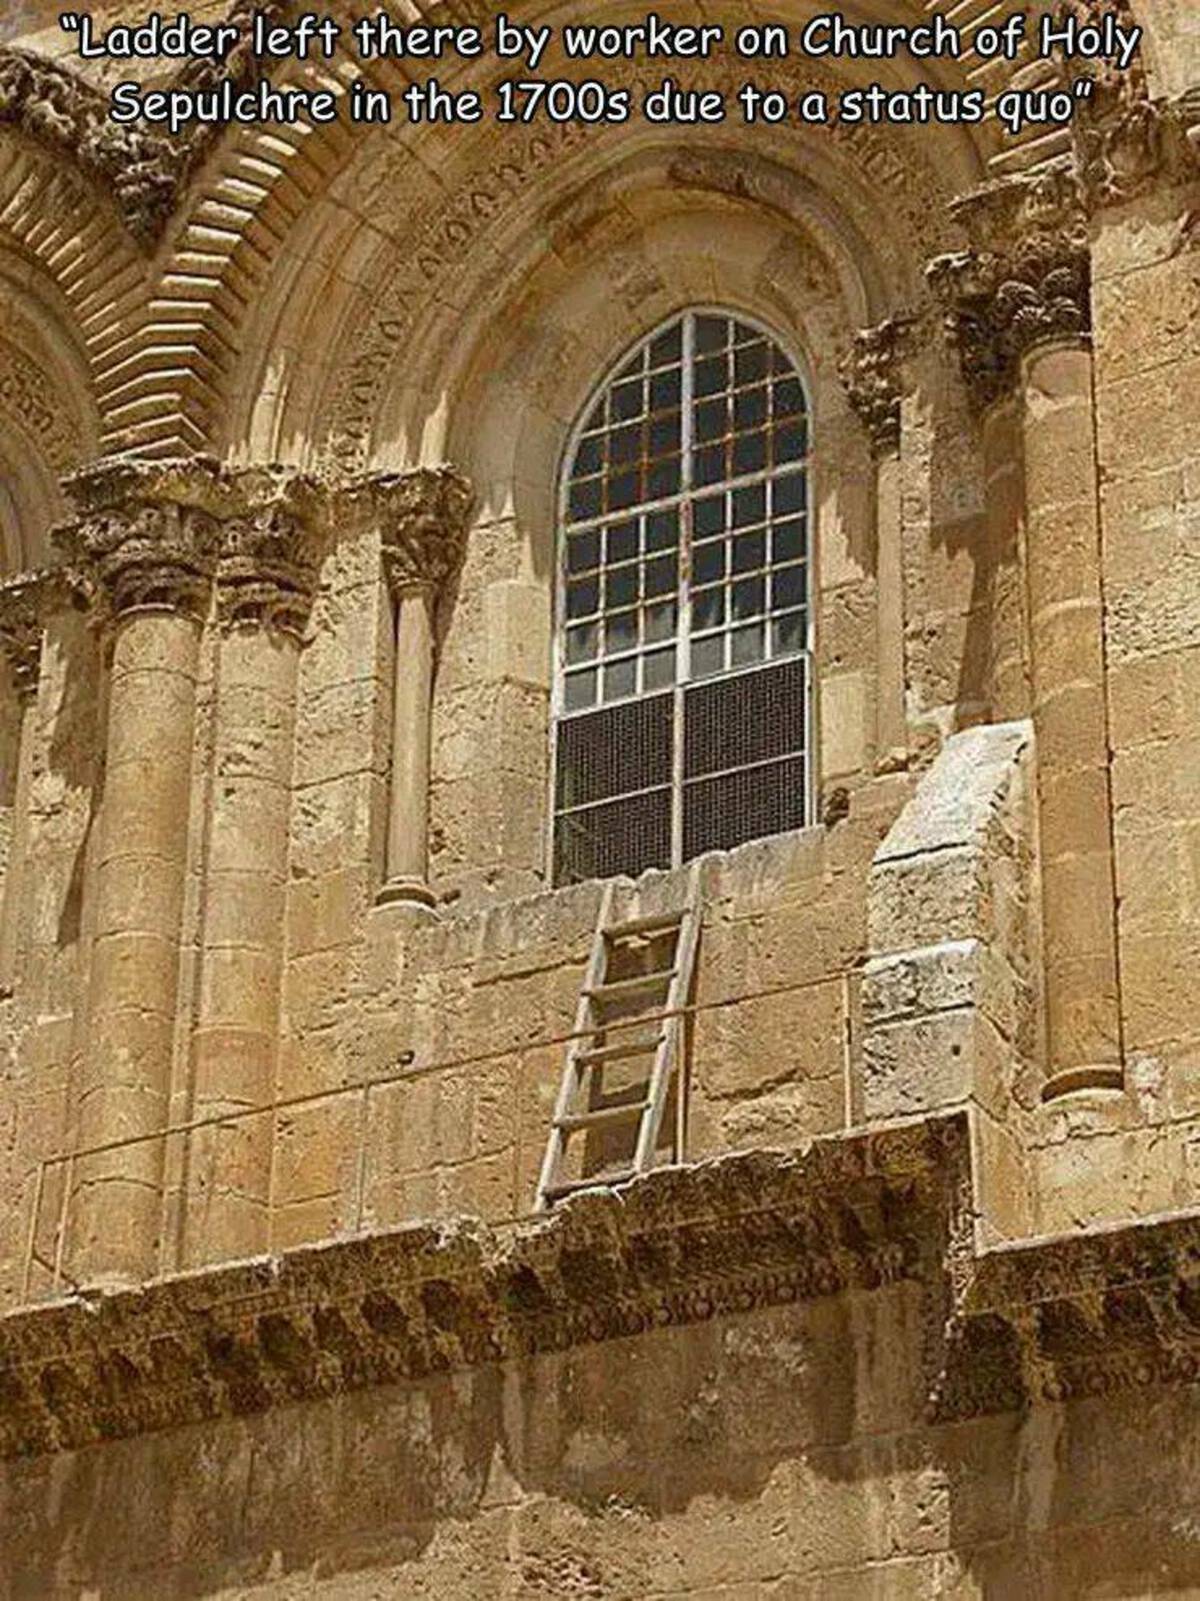 church of the holy sepulchre ladder - "Ladder left there by worker on Church of Holy Sepulchre in the 1700s due to a status quo"